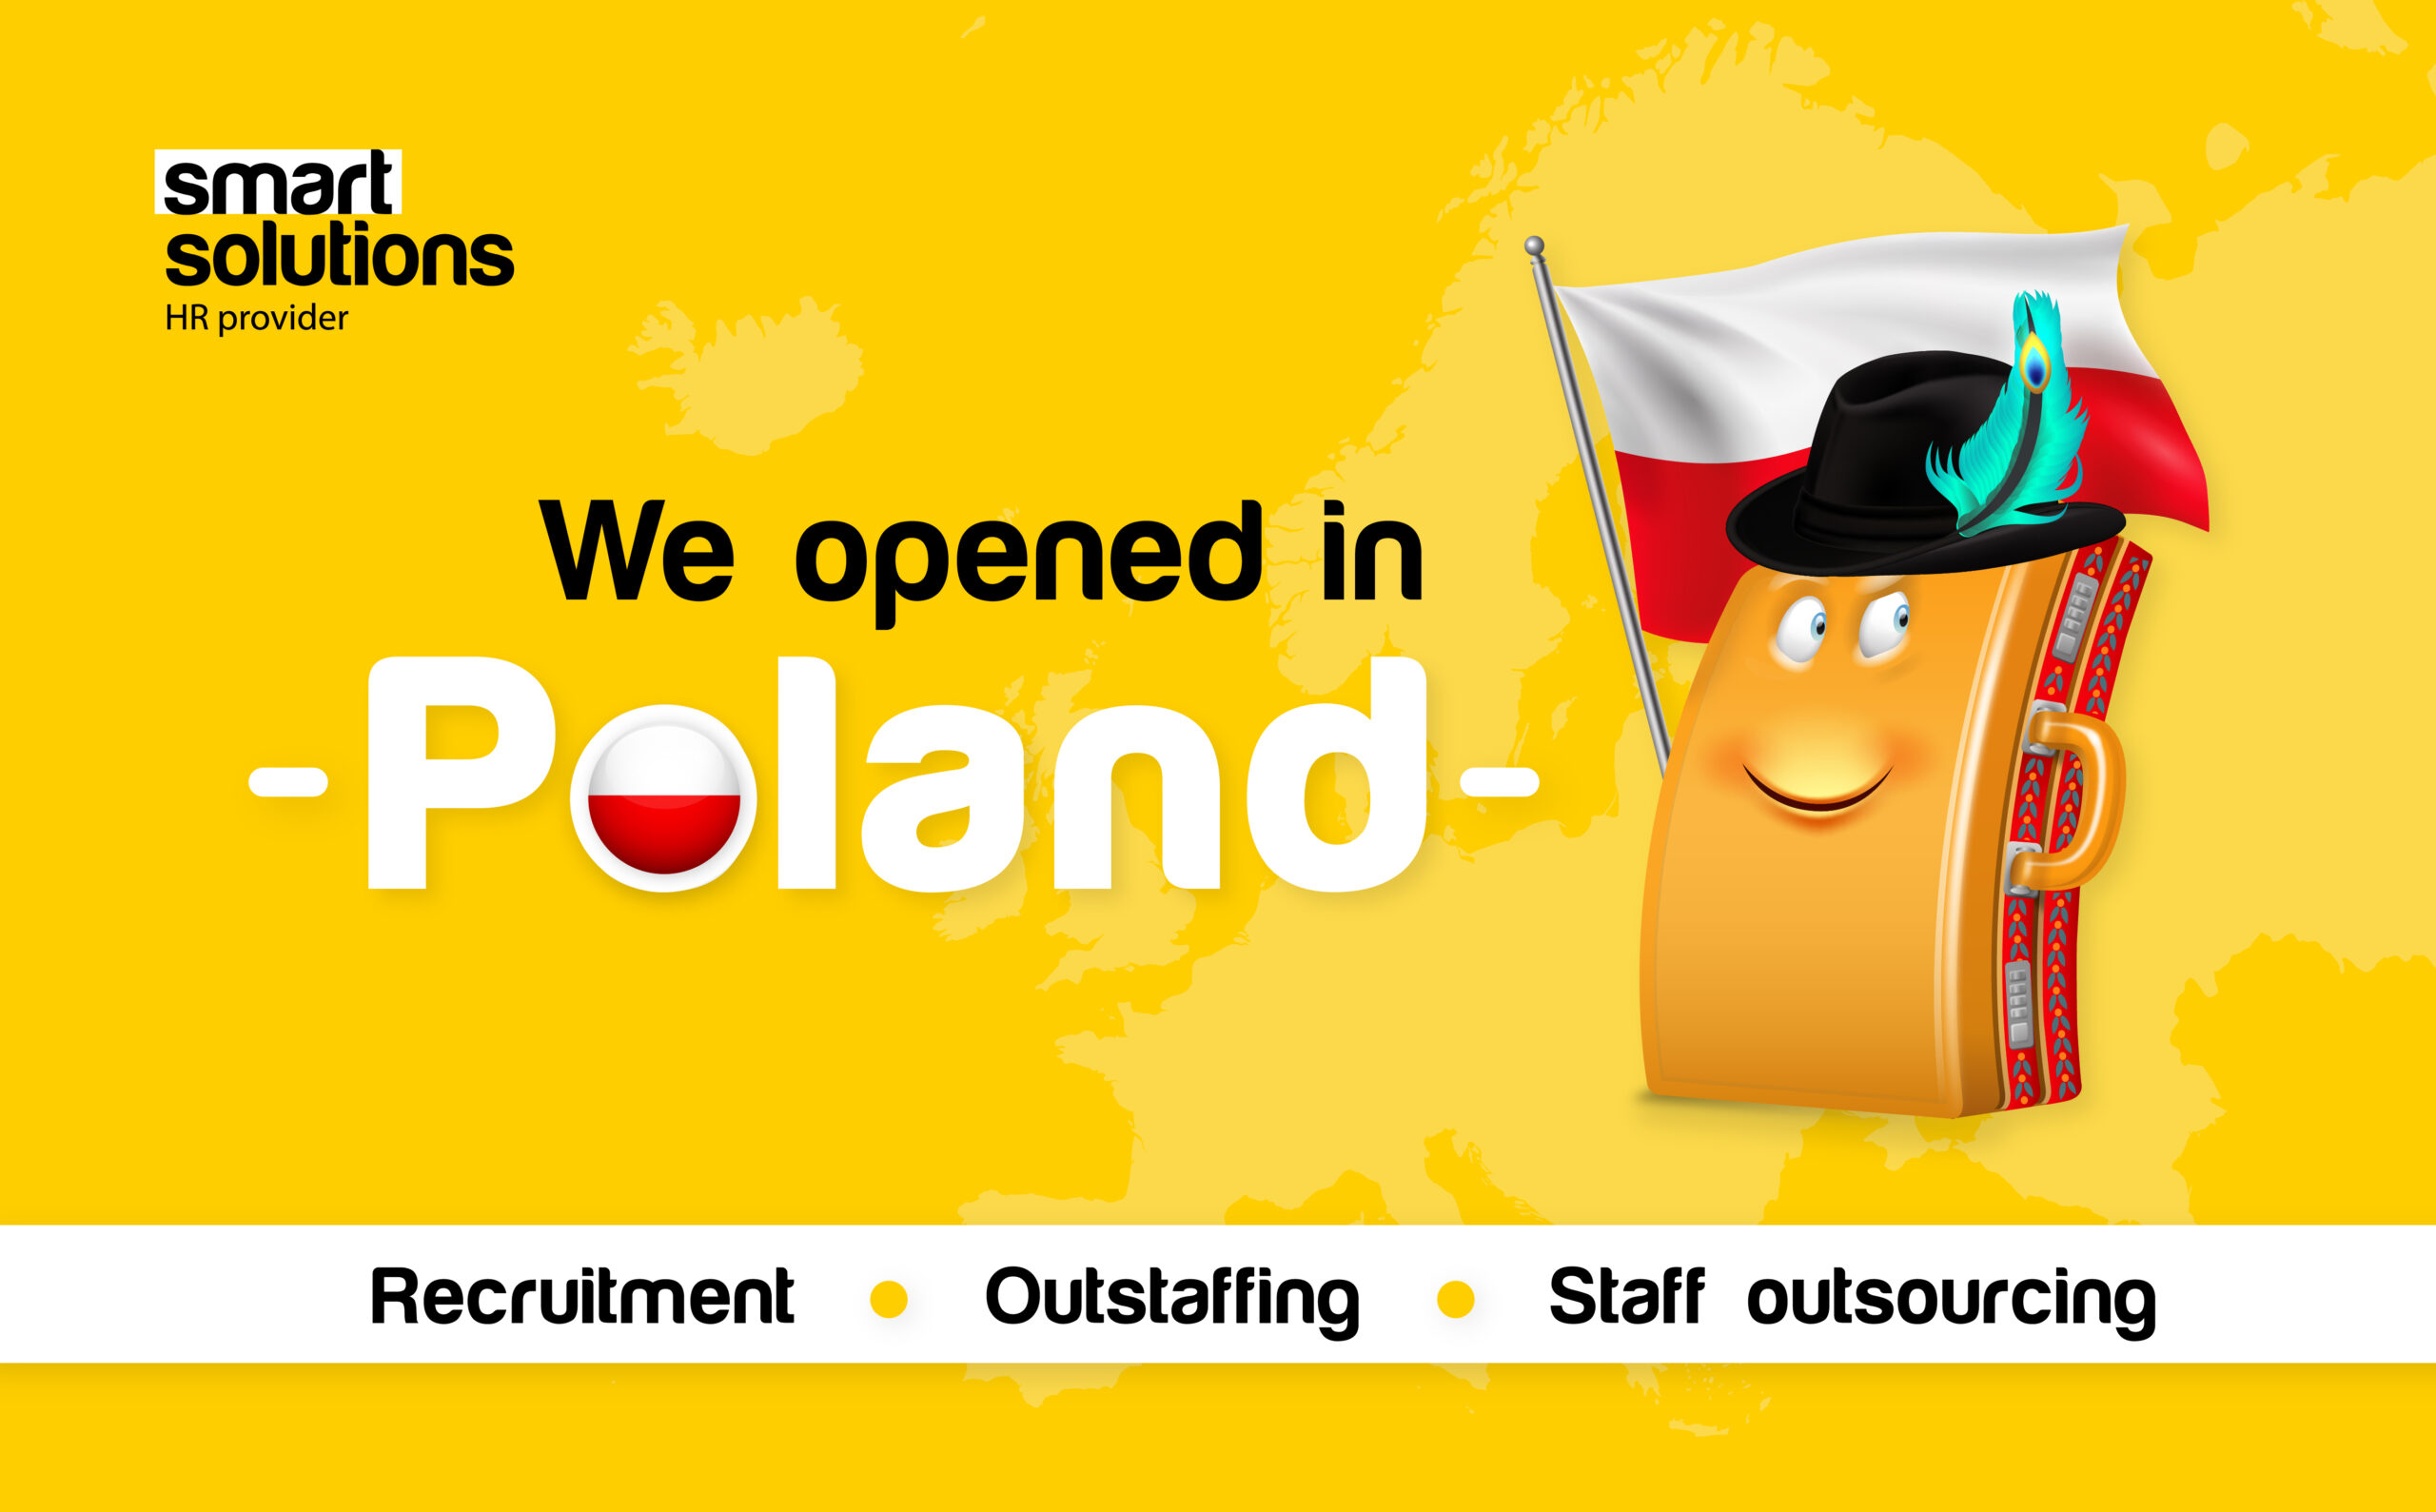 Smart Solutions launches a new office in Poland